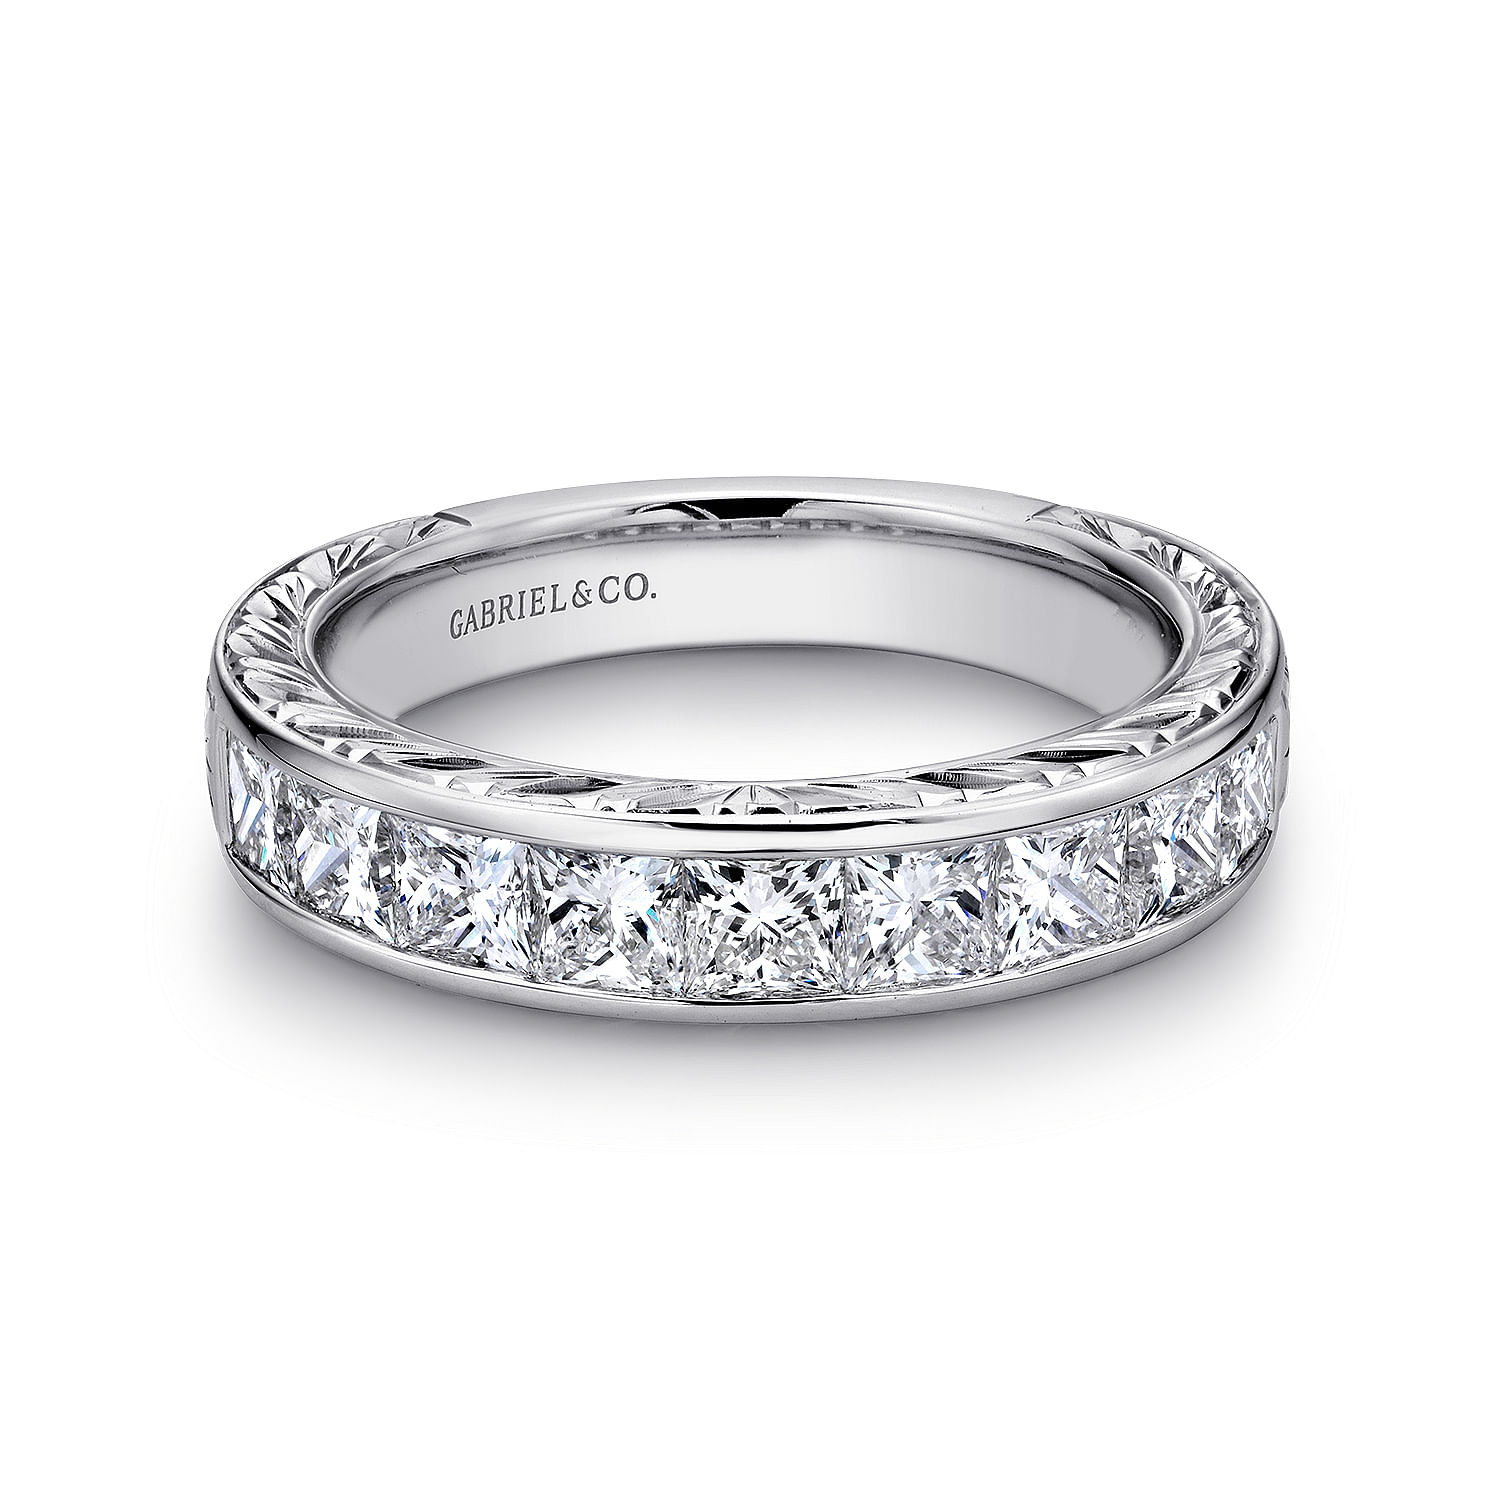 Cesaire - 14K White Gold Princess Cut 9 Stone Channel Set Diamond Wedding Band with Engraving